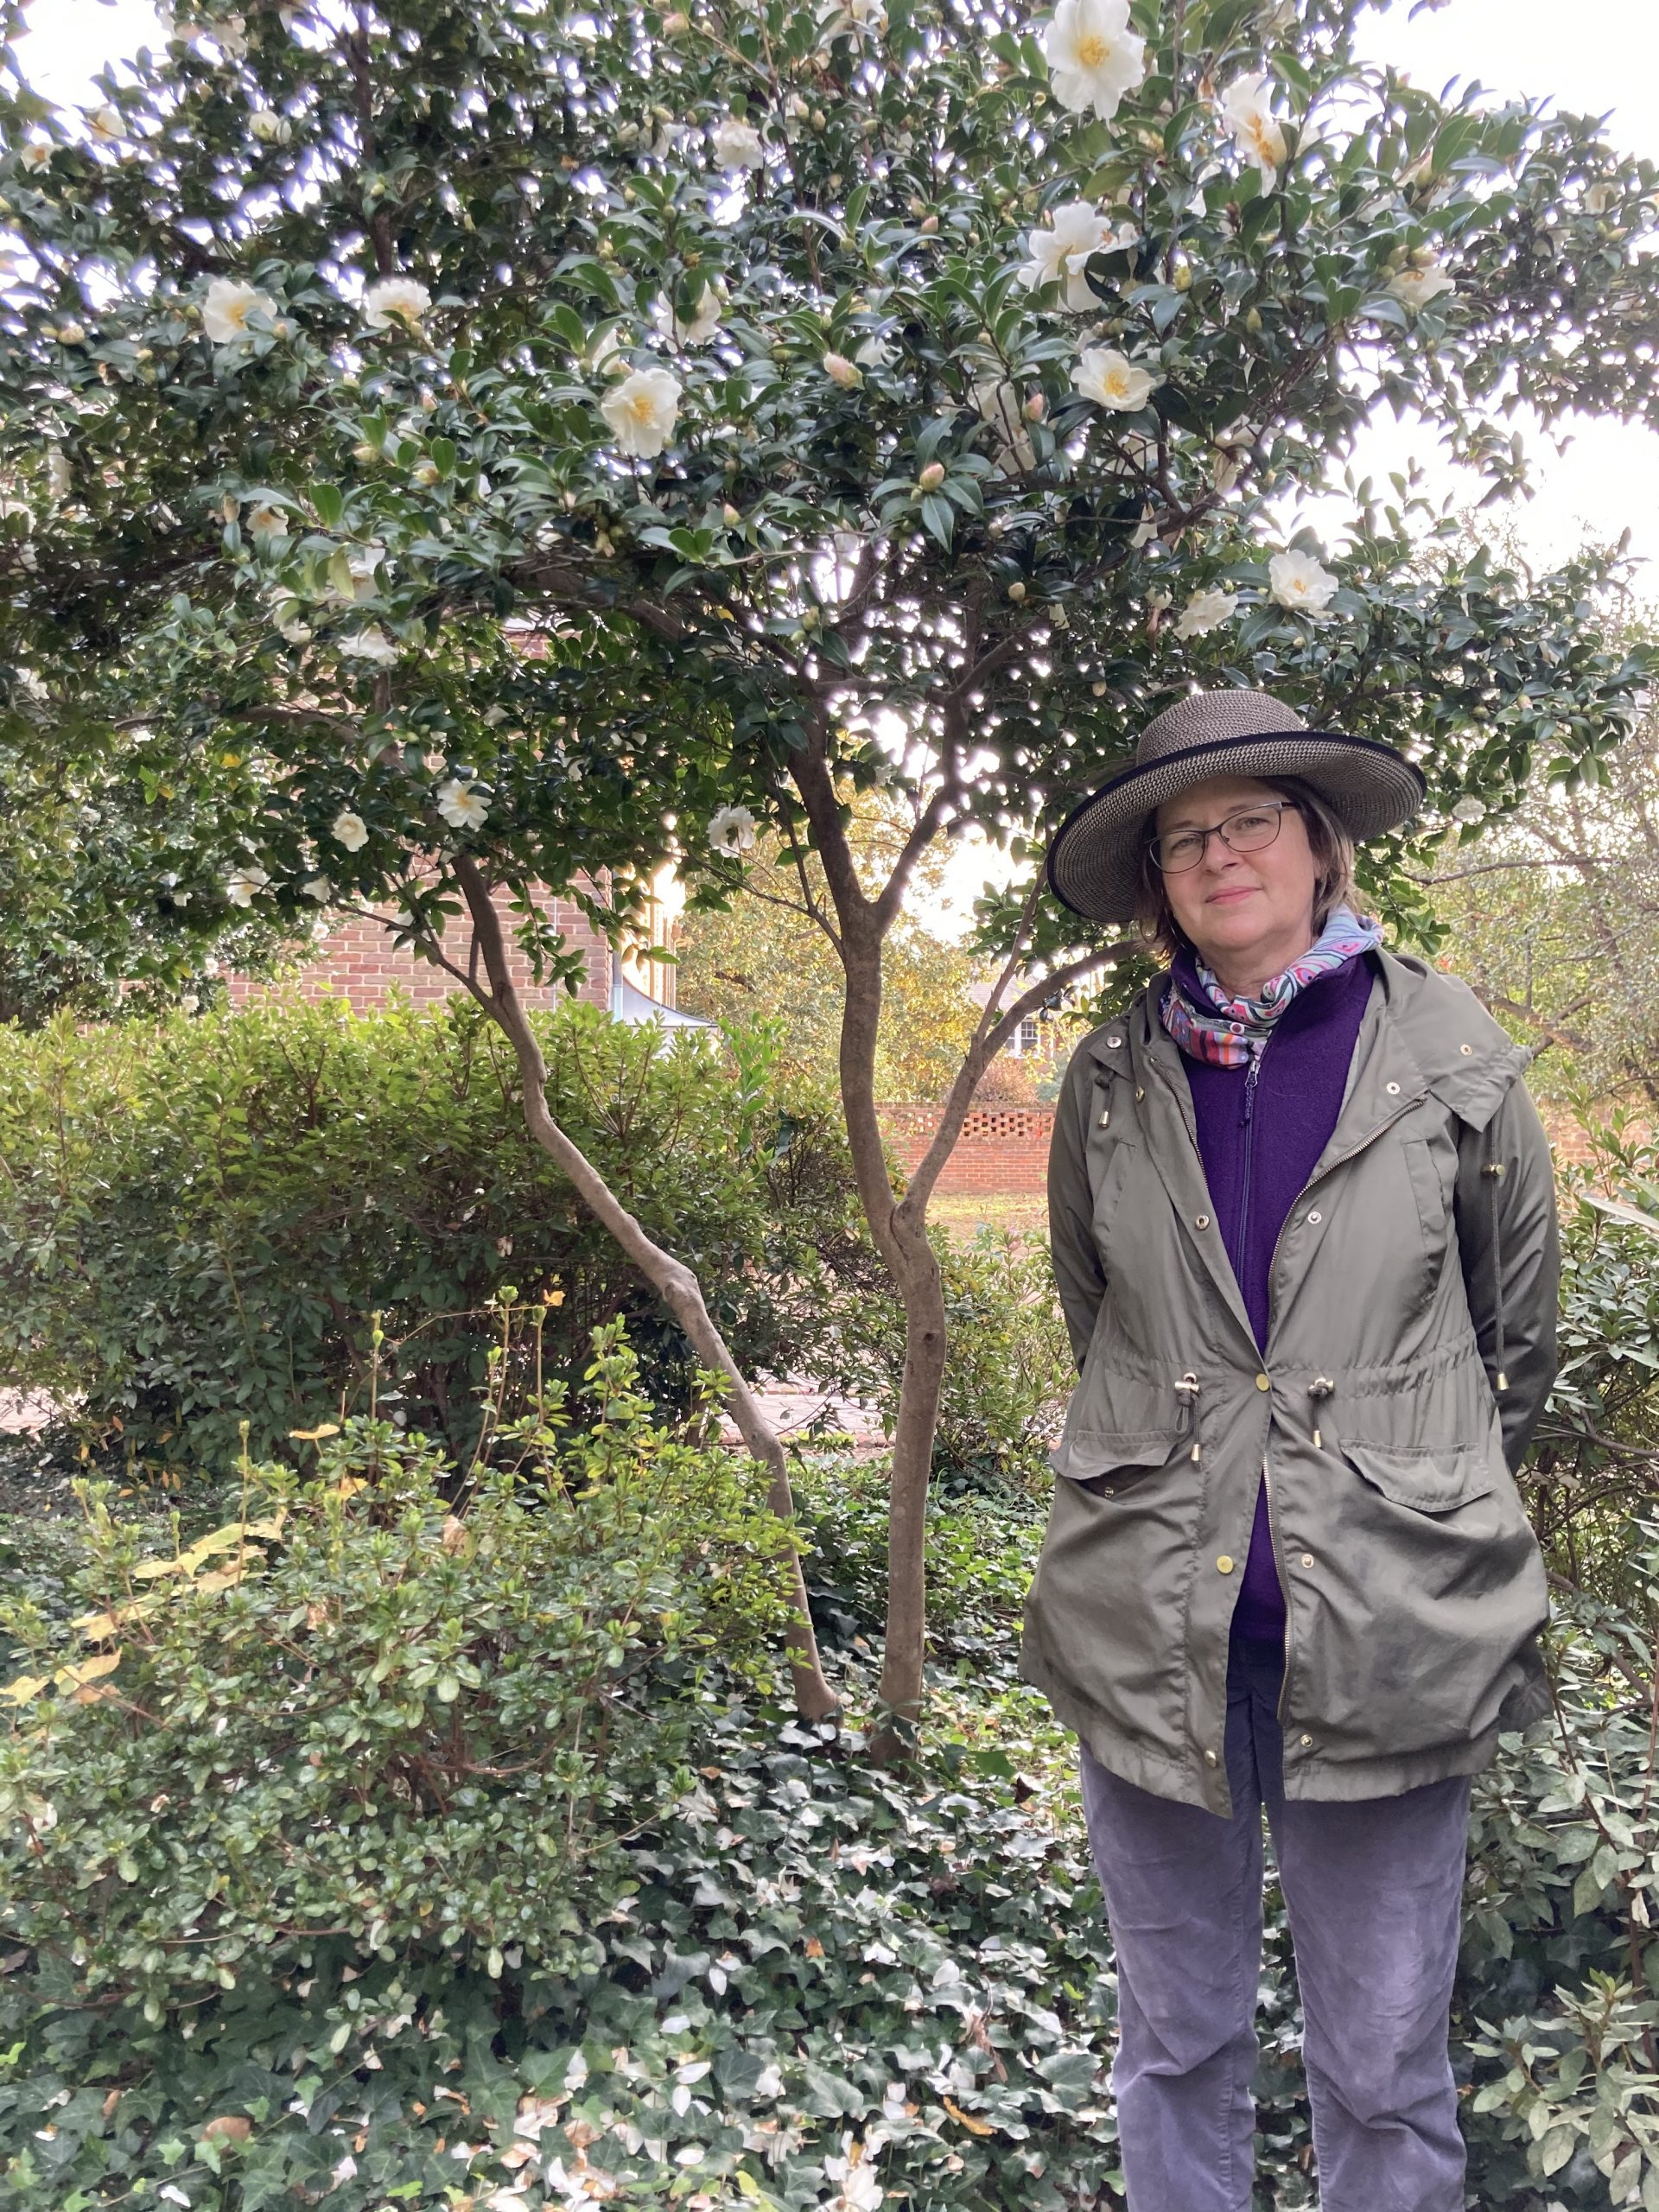 Emily Jones, landscape architect for USC, stands by a camellia pruned to an exceptionally open form in the Finlay Gardens behind the Barringer House. The funds for the garden were generously donated by Peg Averyt in honor of the Finlays. 